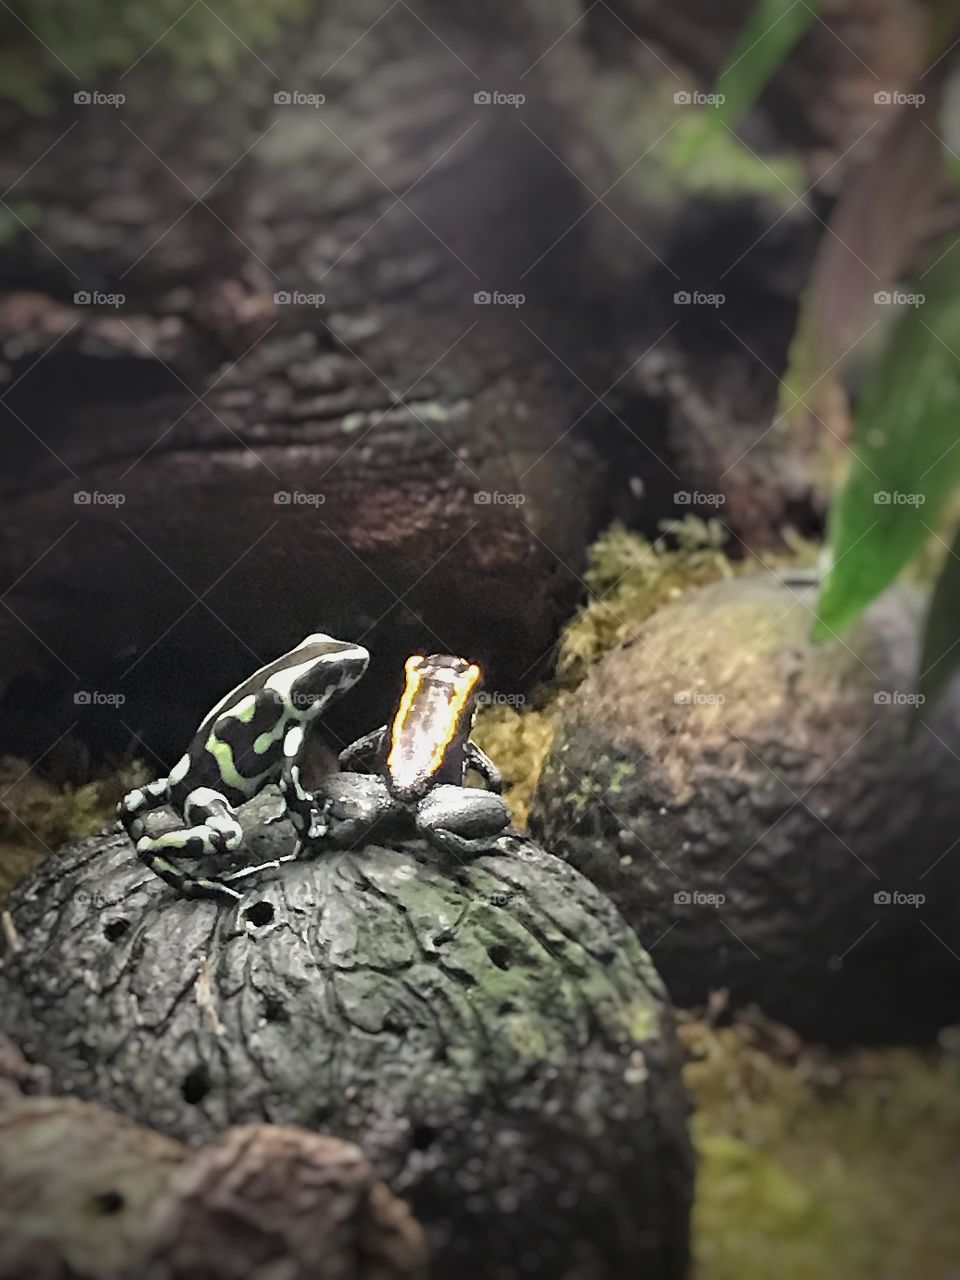 Poisonous frogs 